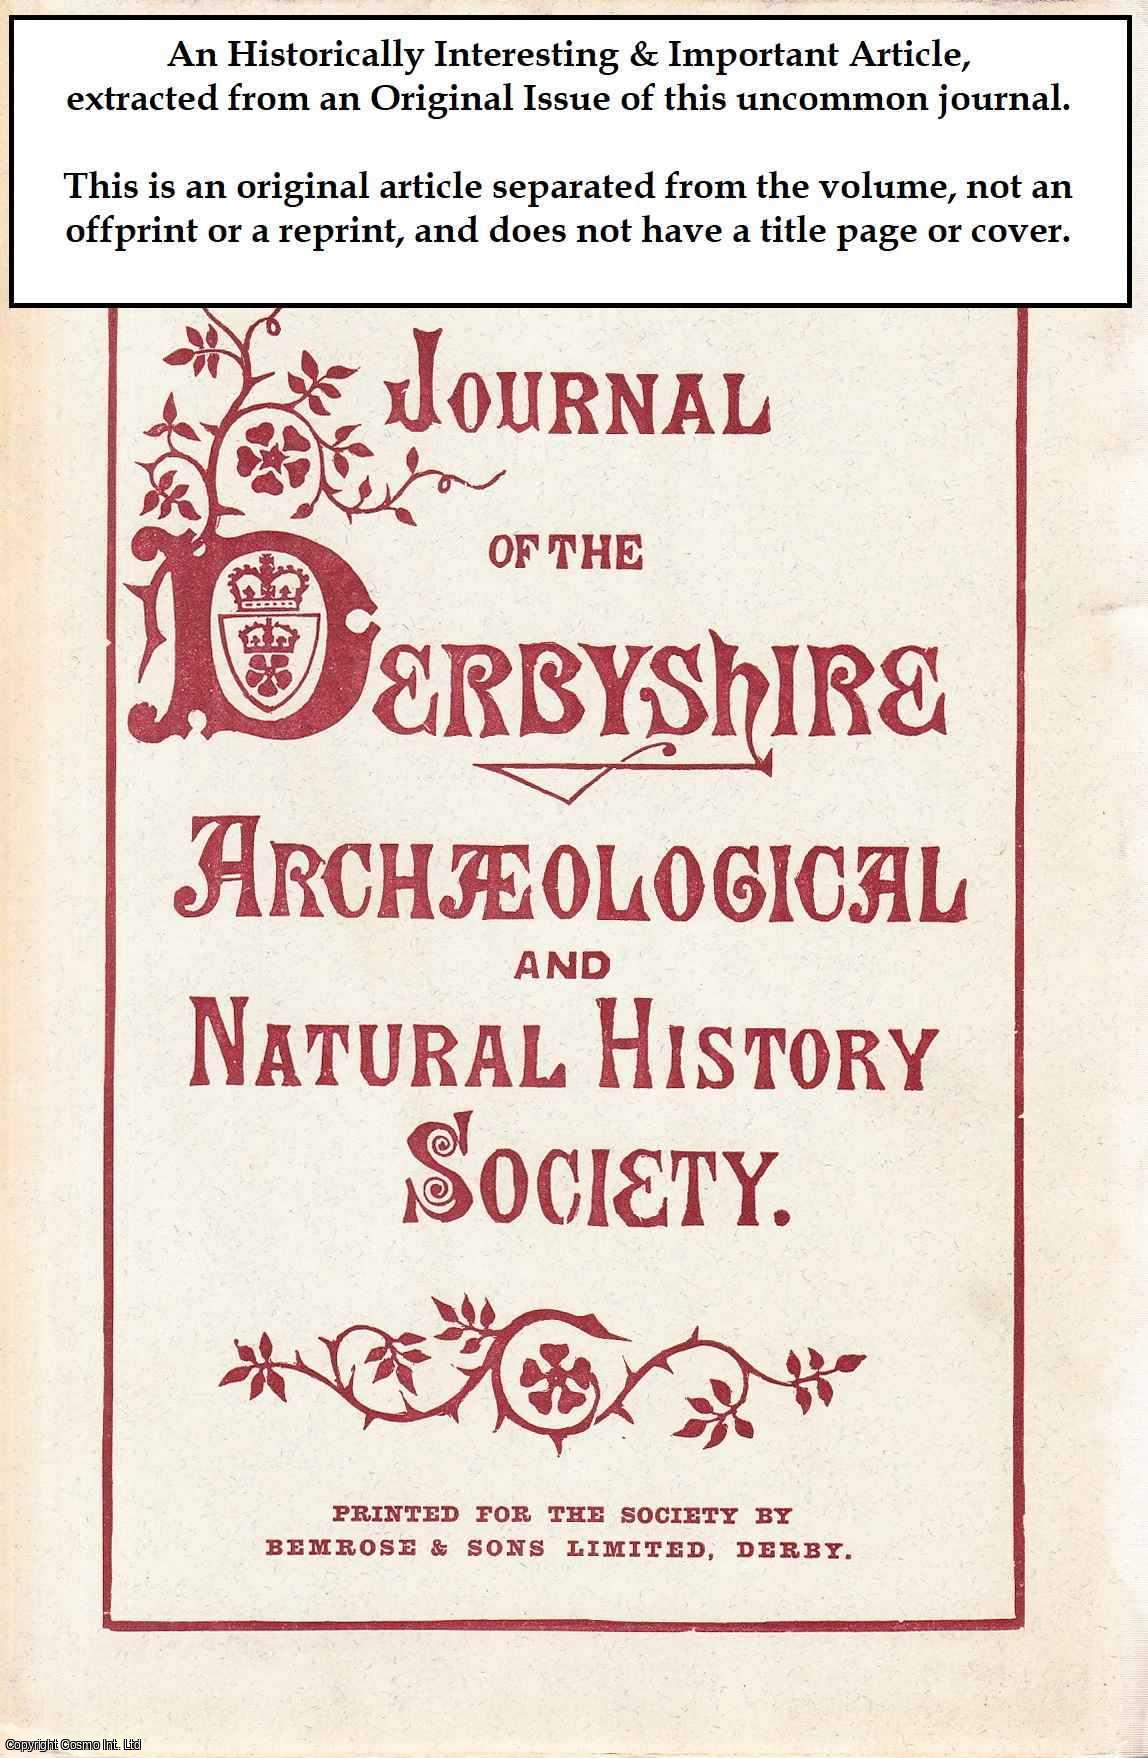 Francis C. R. Jourdain - Rare Migrants to Derbyshire in 1904. An original article from the Journal of the Derbyshire Archaeological & Natural History Society, 1905.